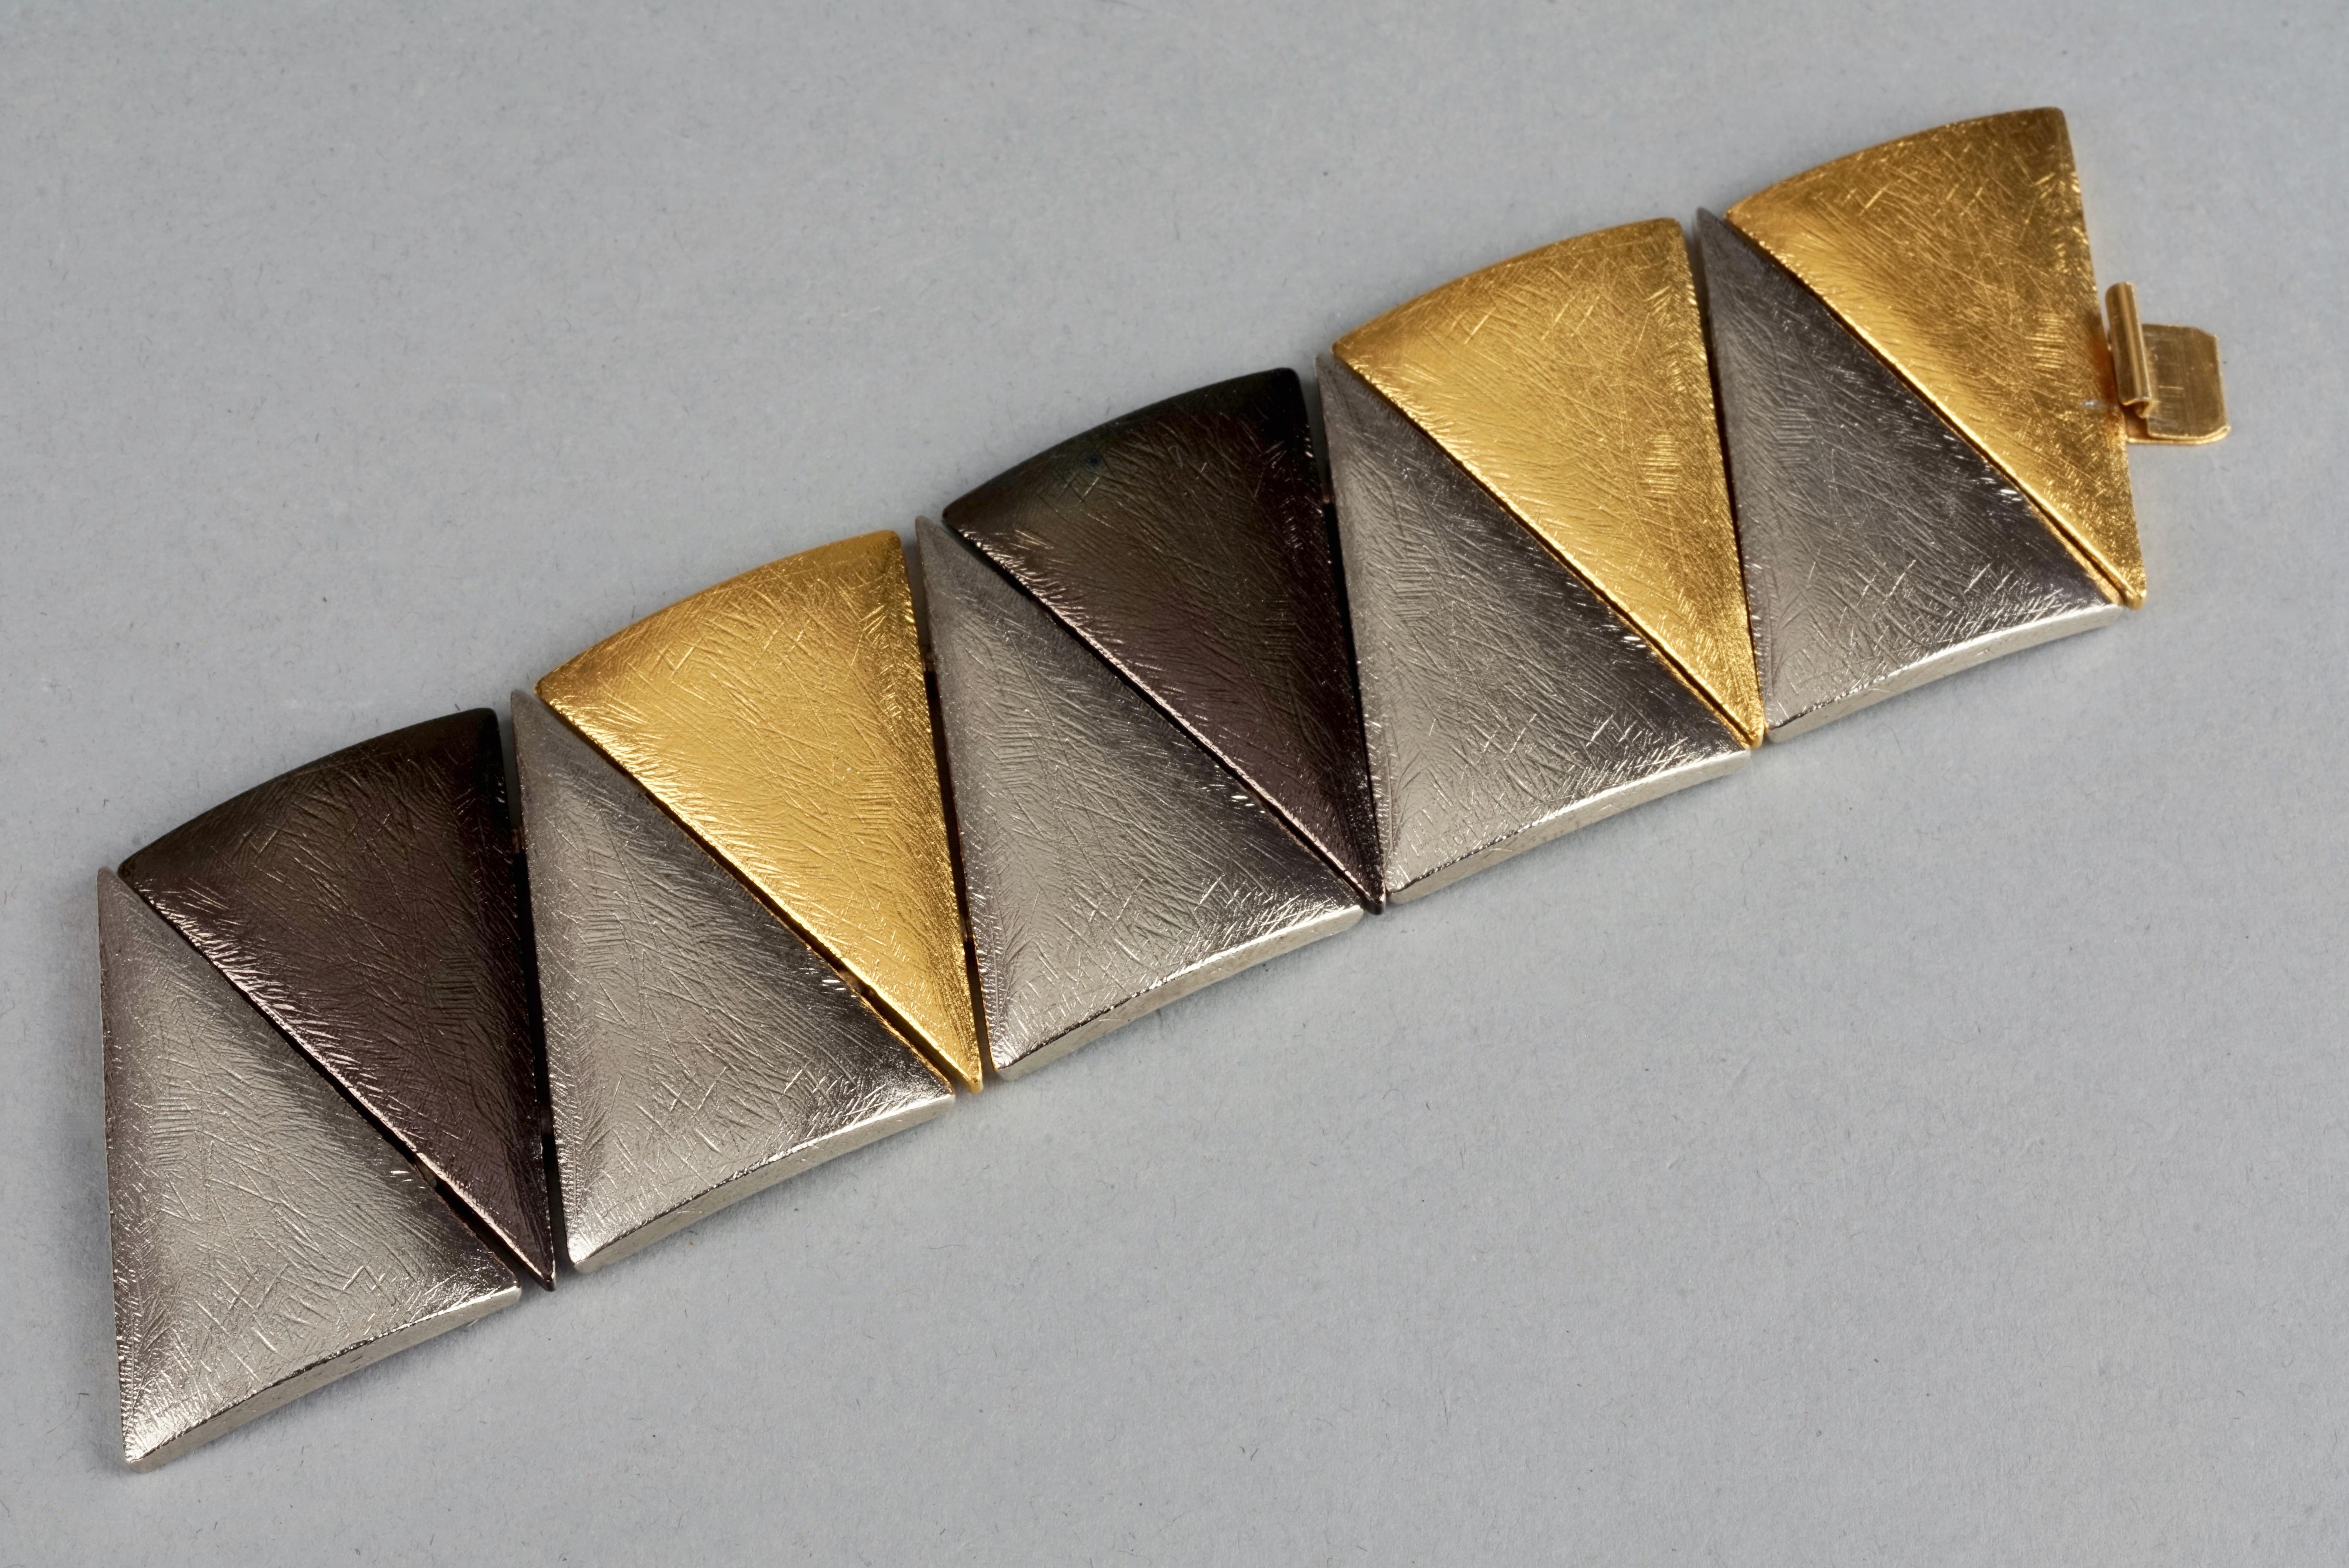 Vintage YVES SAINT LAURENT Ysl Triangle Link Tricolor Cuff Bracelet In Good Condition For Sale In Kingersheim, Alsace